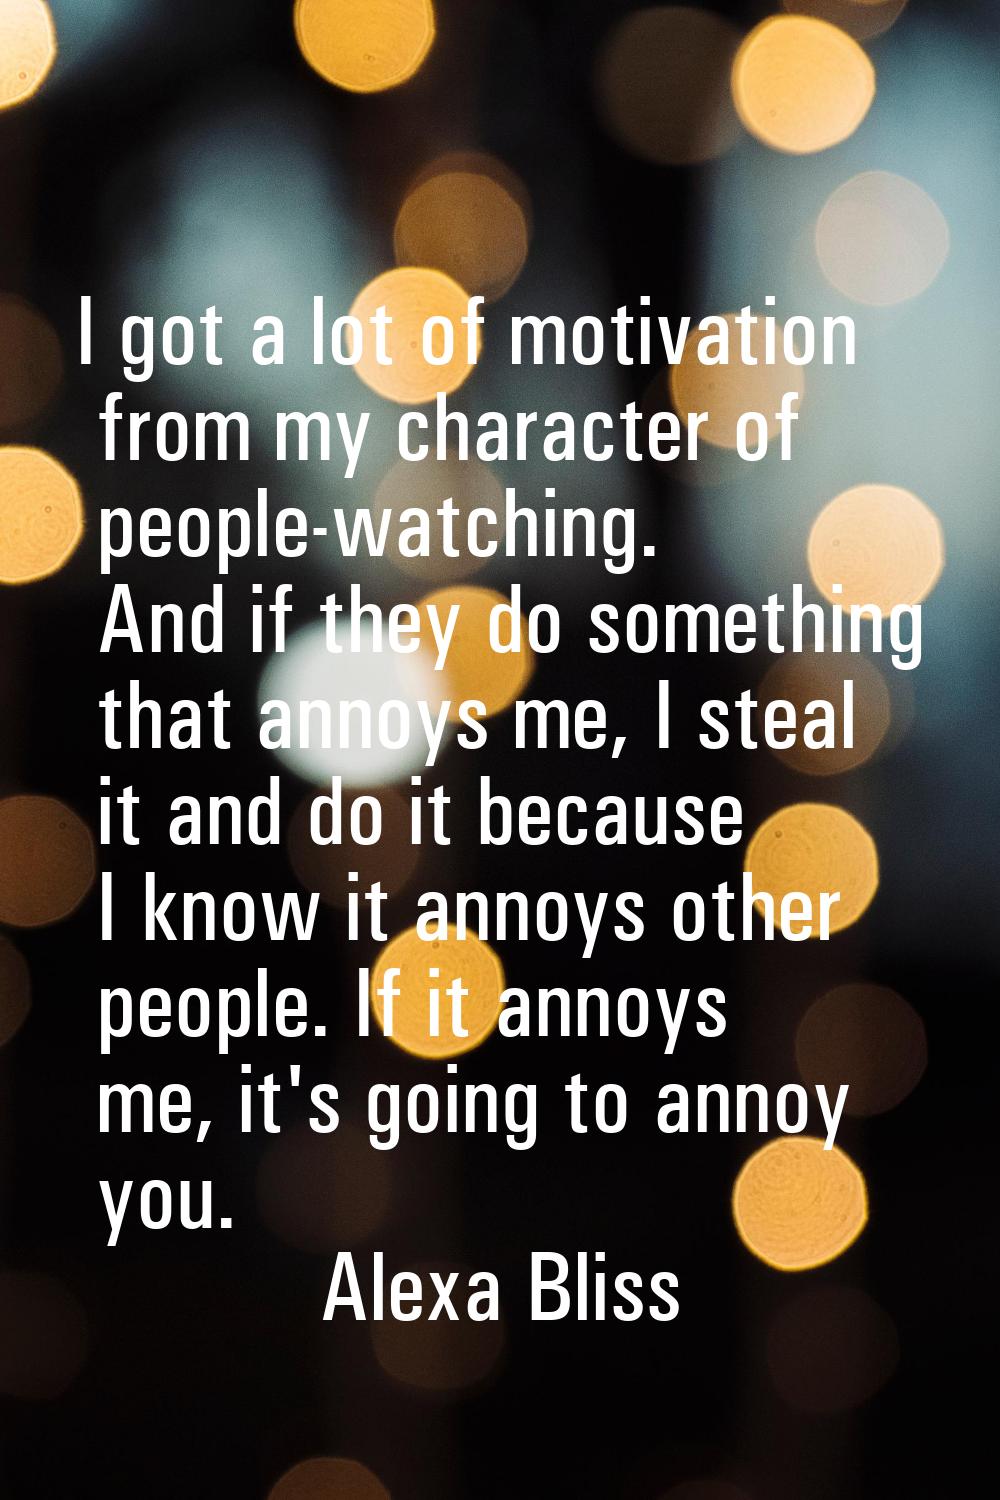 I got a lot of motivation from my character of people-watching. And if they do something that annoy